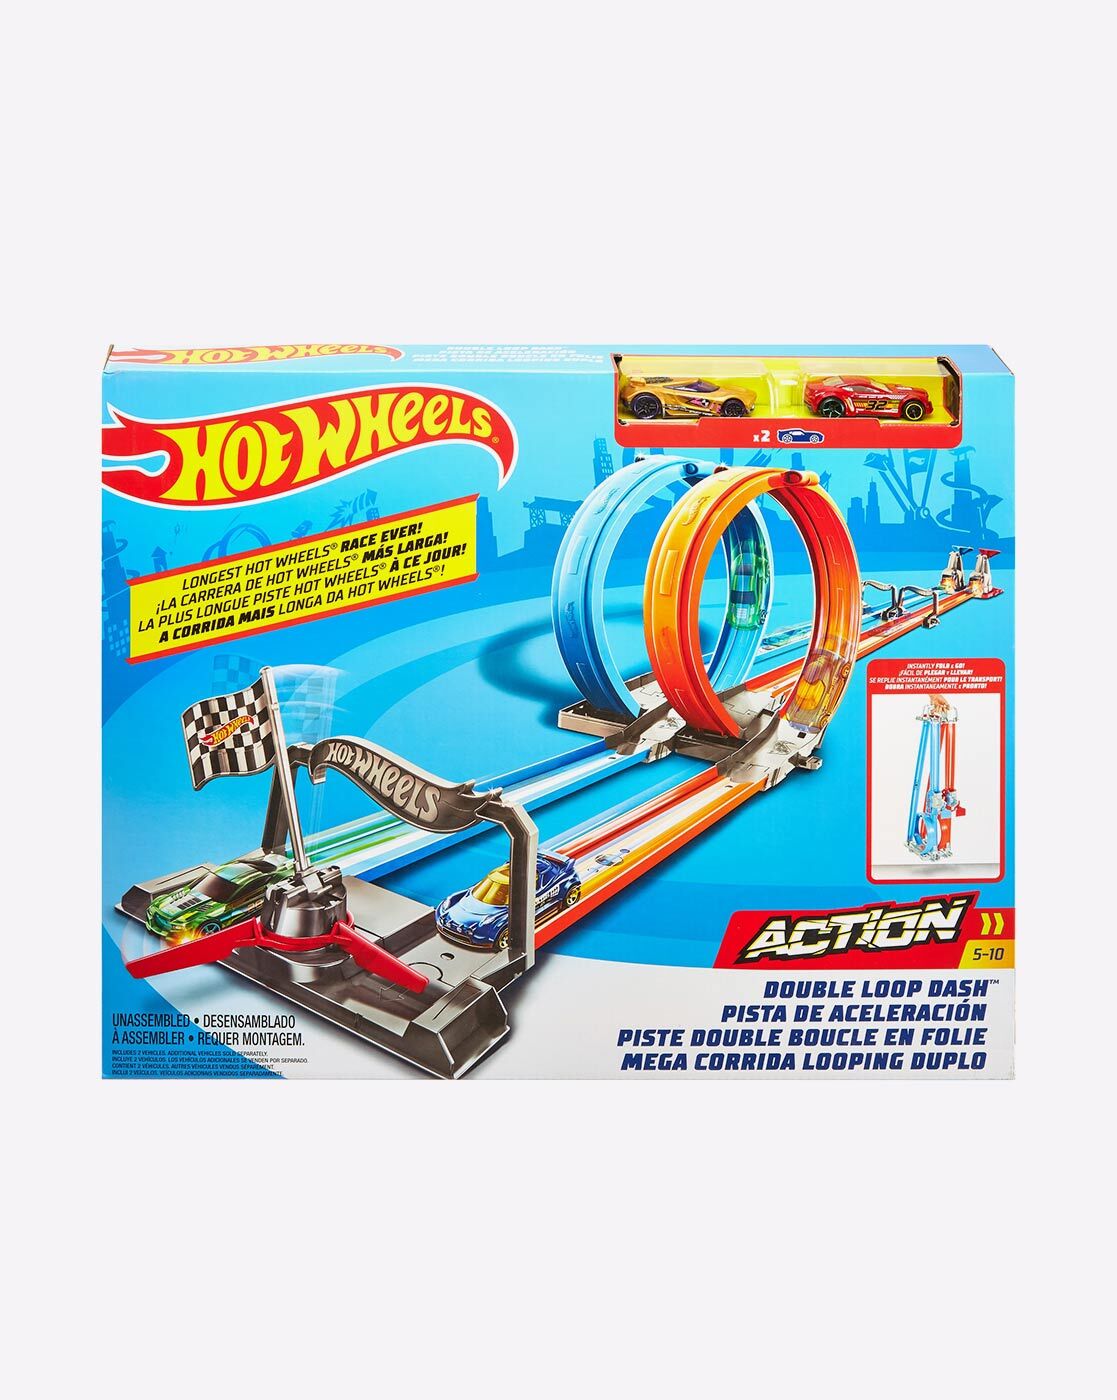 Hot Wheels robotic dragon, toy car track-the best games and toys-original  brand toys